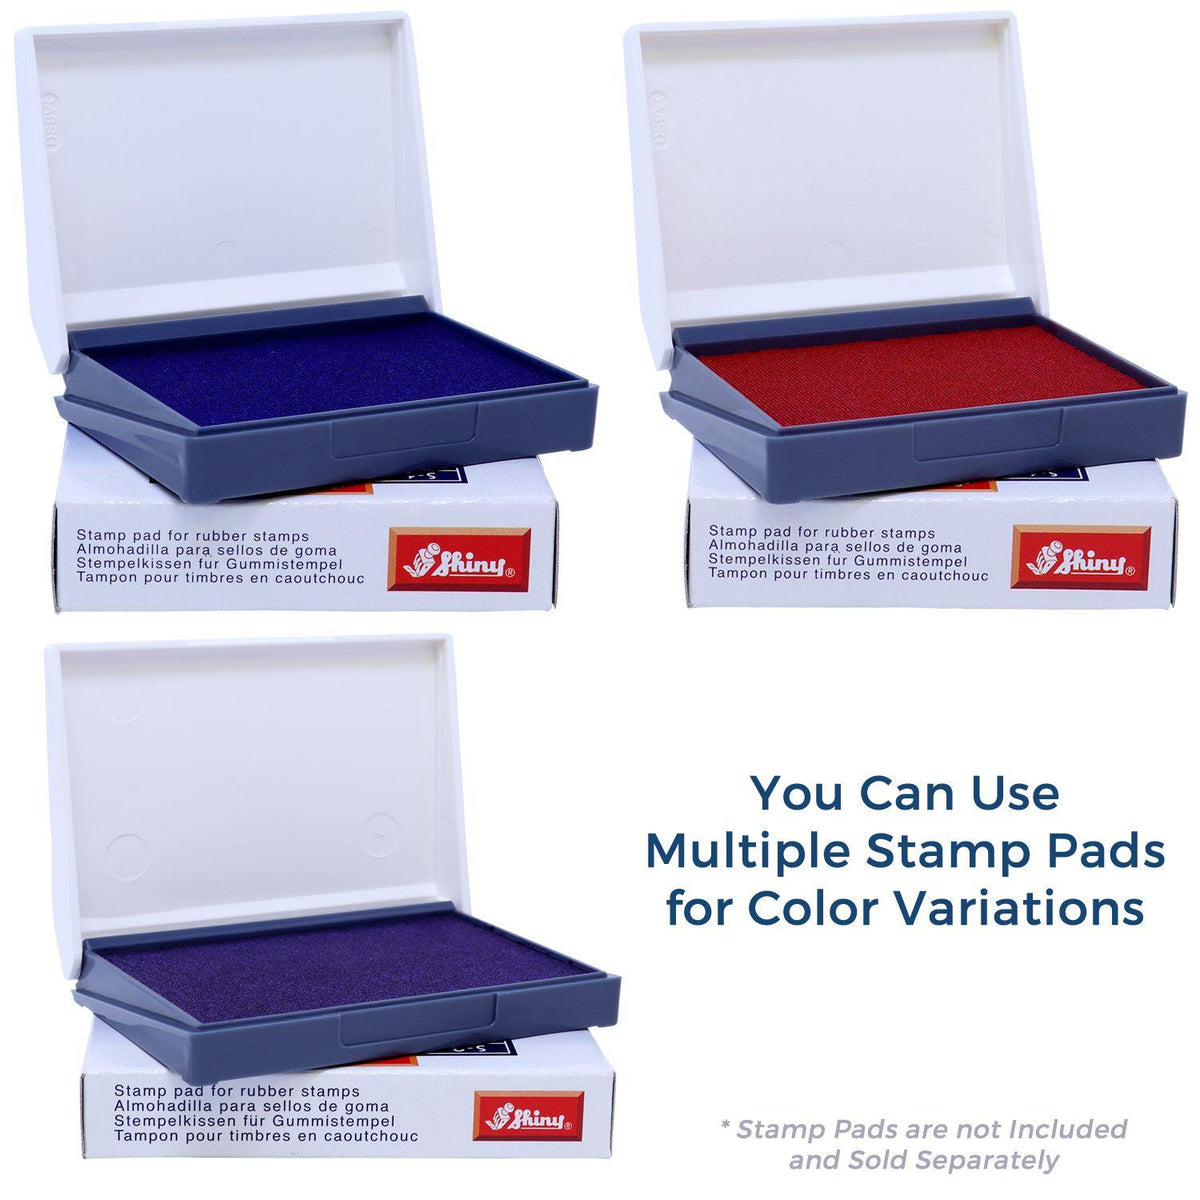 Stamp Pads for Good Job Rubber Stamp Available